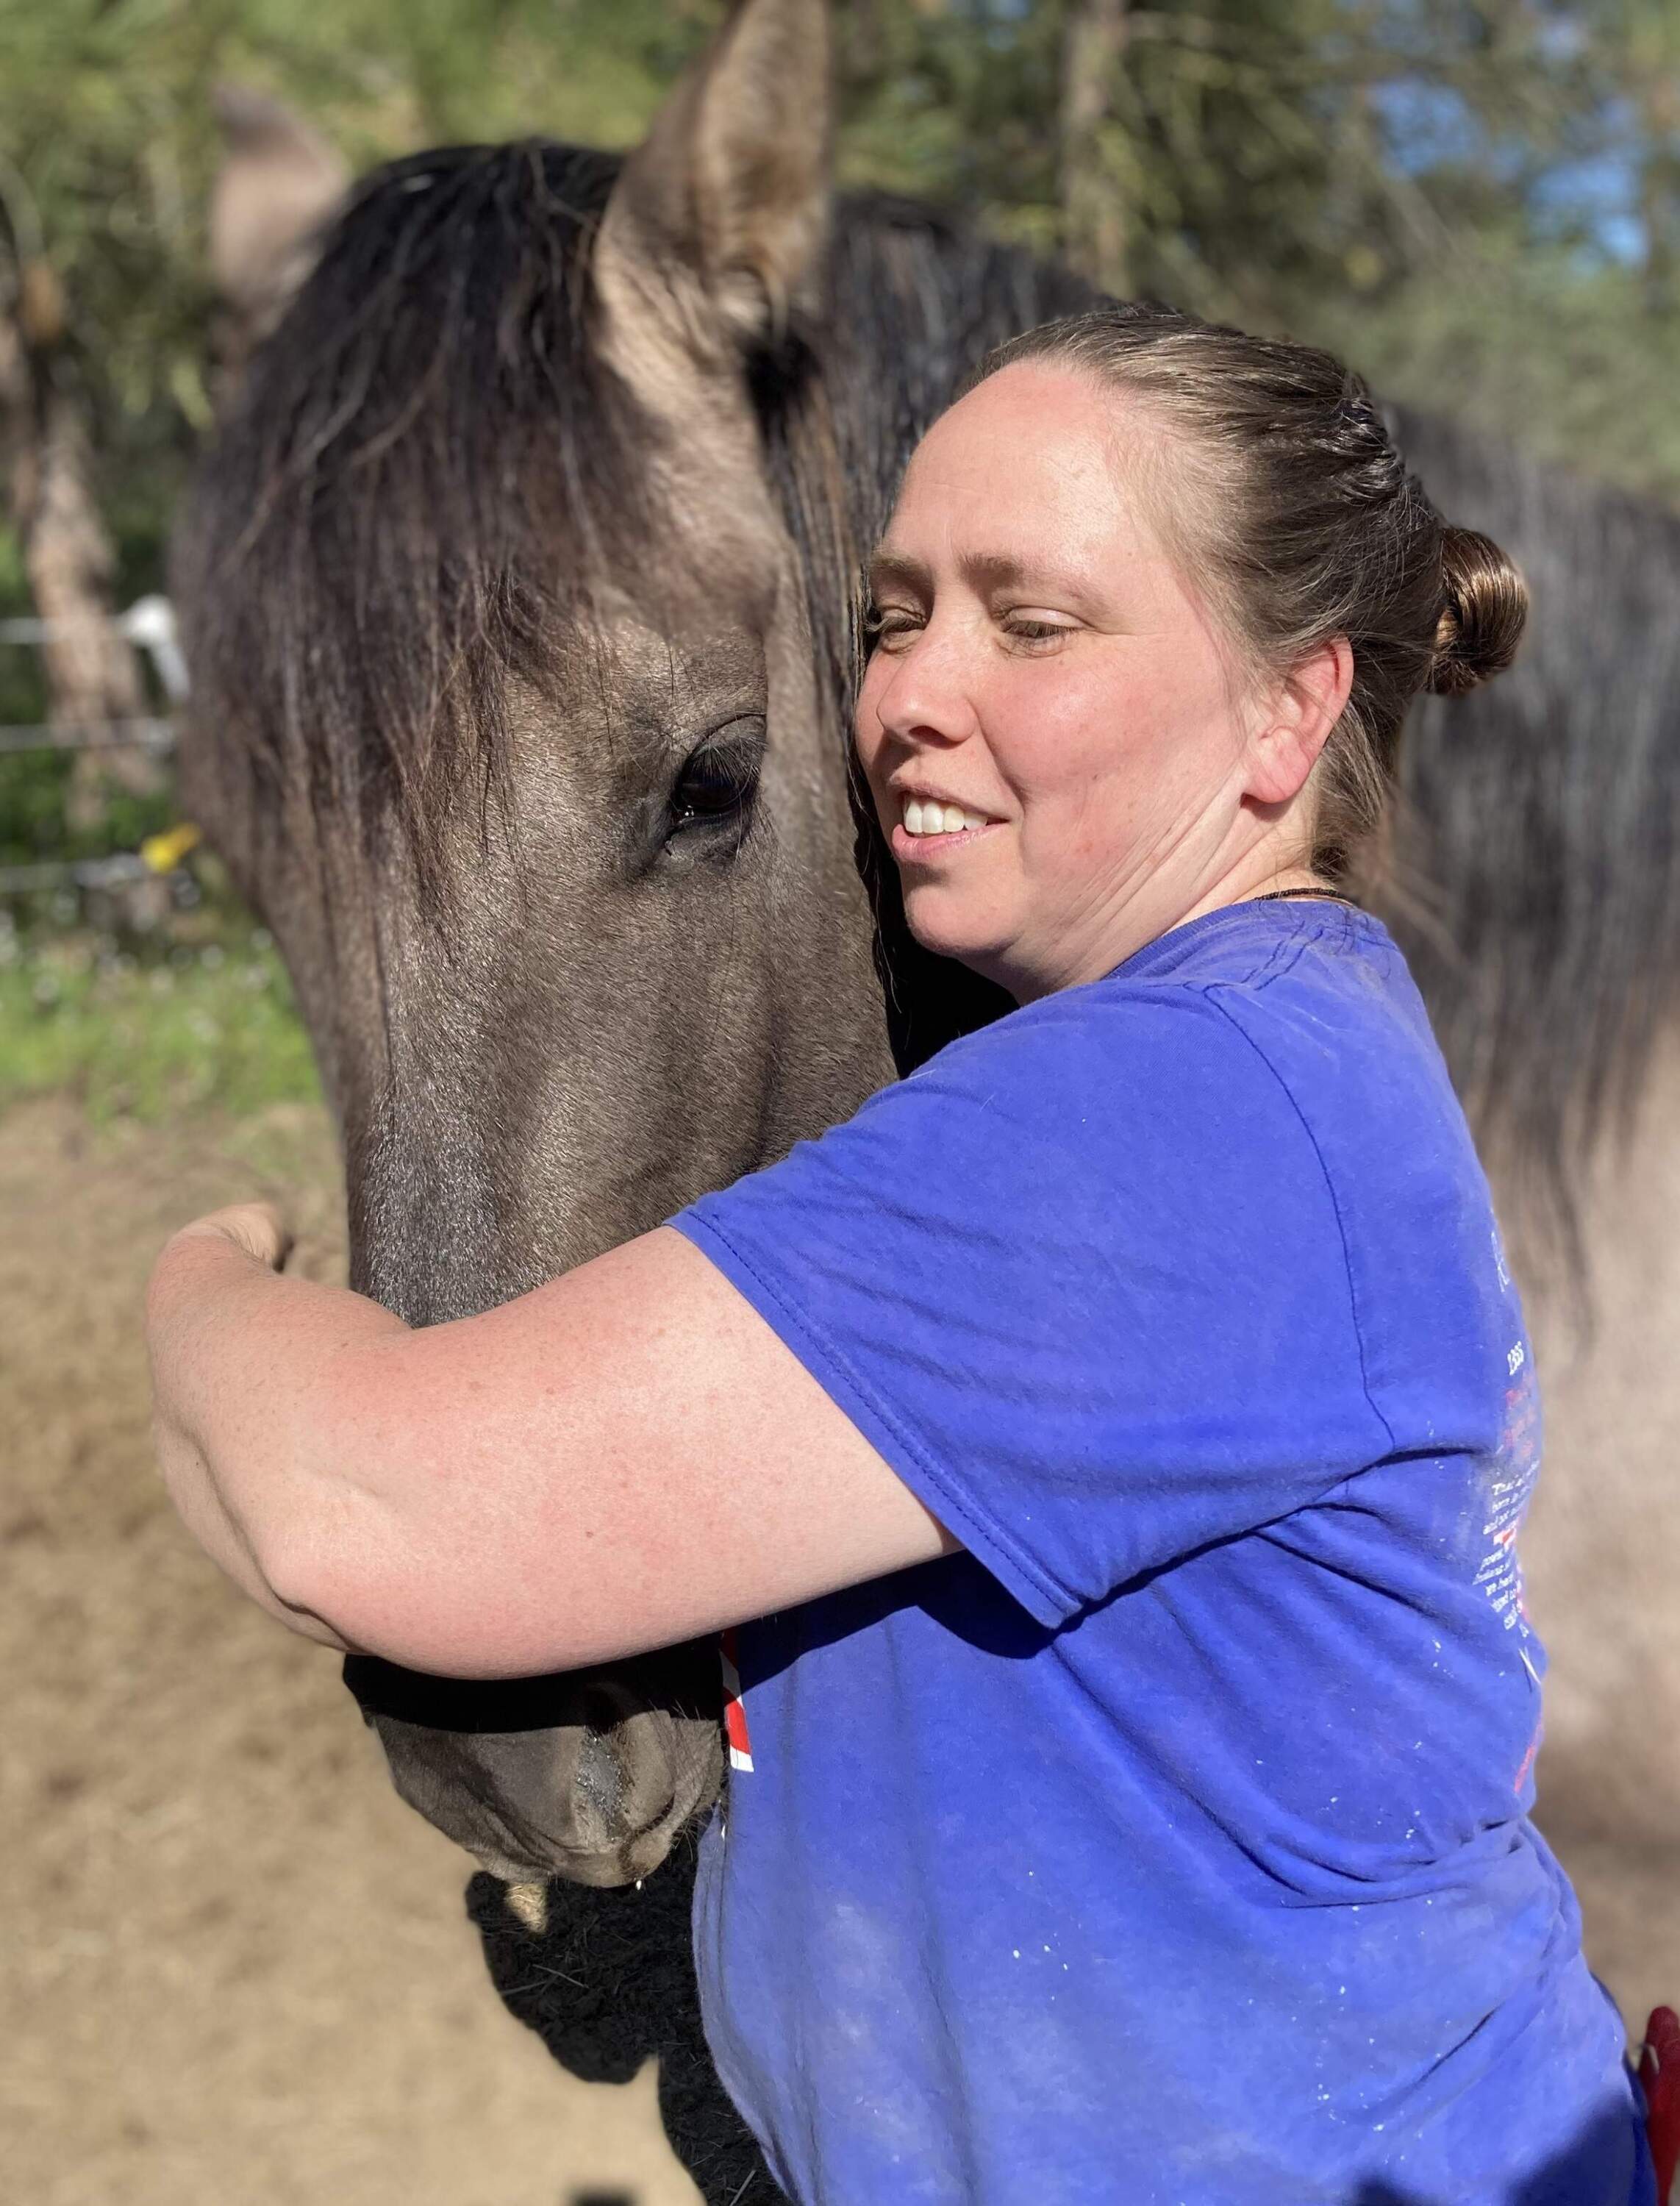 Allison Burke, founder of Spqni Equines in Transition, hugs her mustang, Blue. “He's got a very, very low fear threshold. So he doesn't always let me touch him. It's got to be his idea.” (Ashley Ahearn)